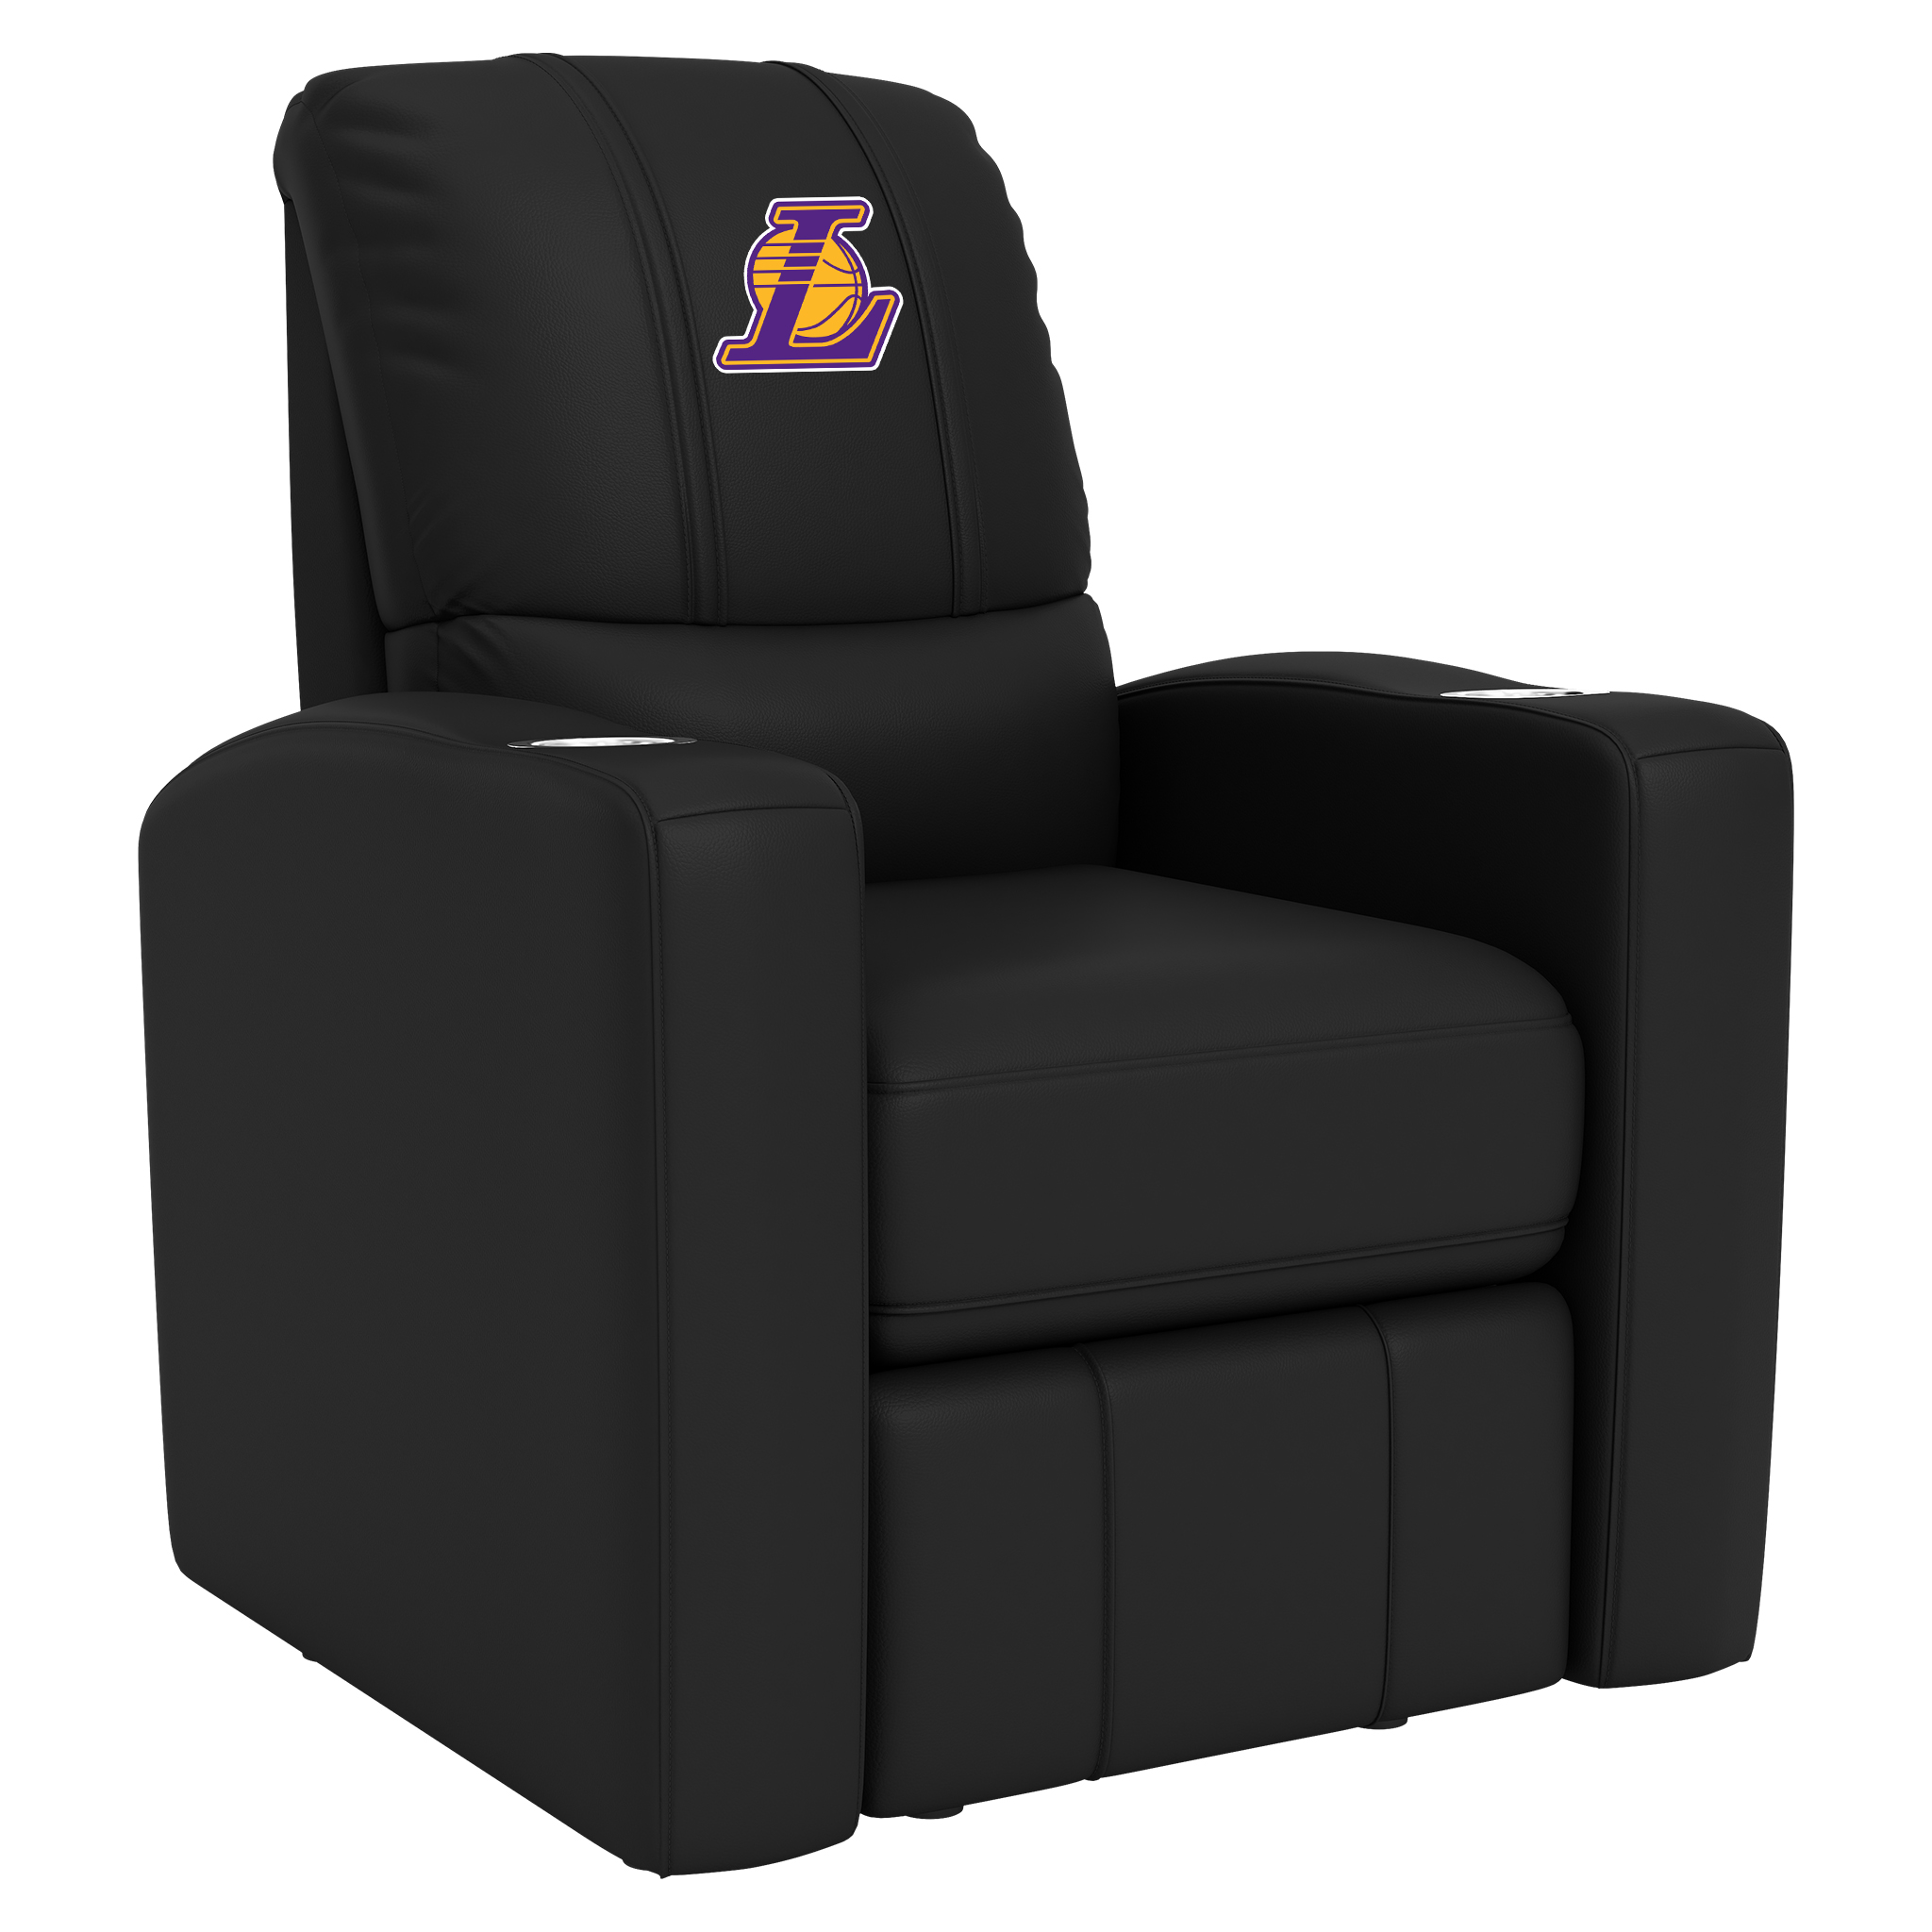 Los Angeles Lakers Stealth Recliner with Los Angeles Lakers Secondary